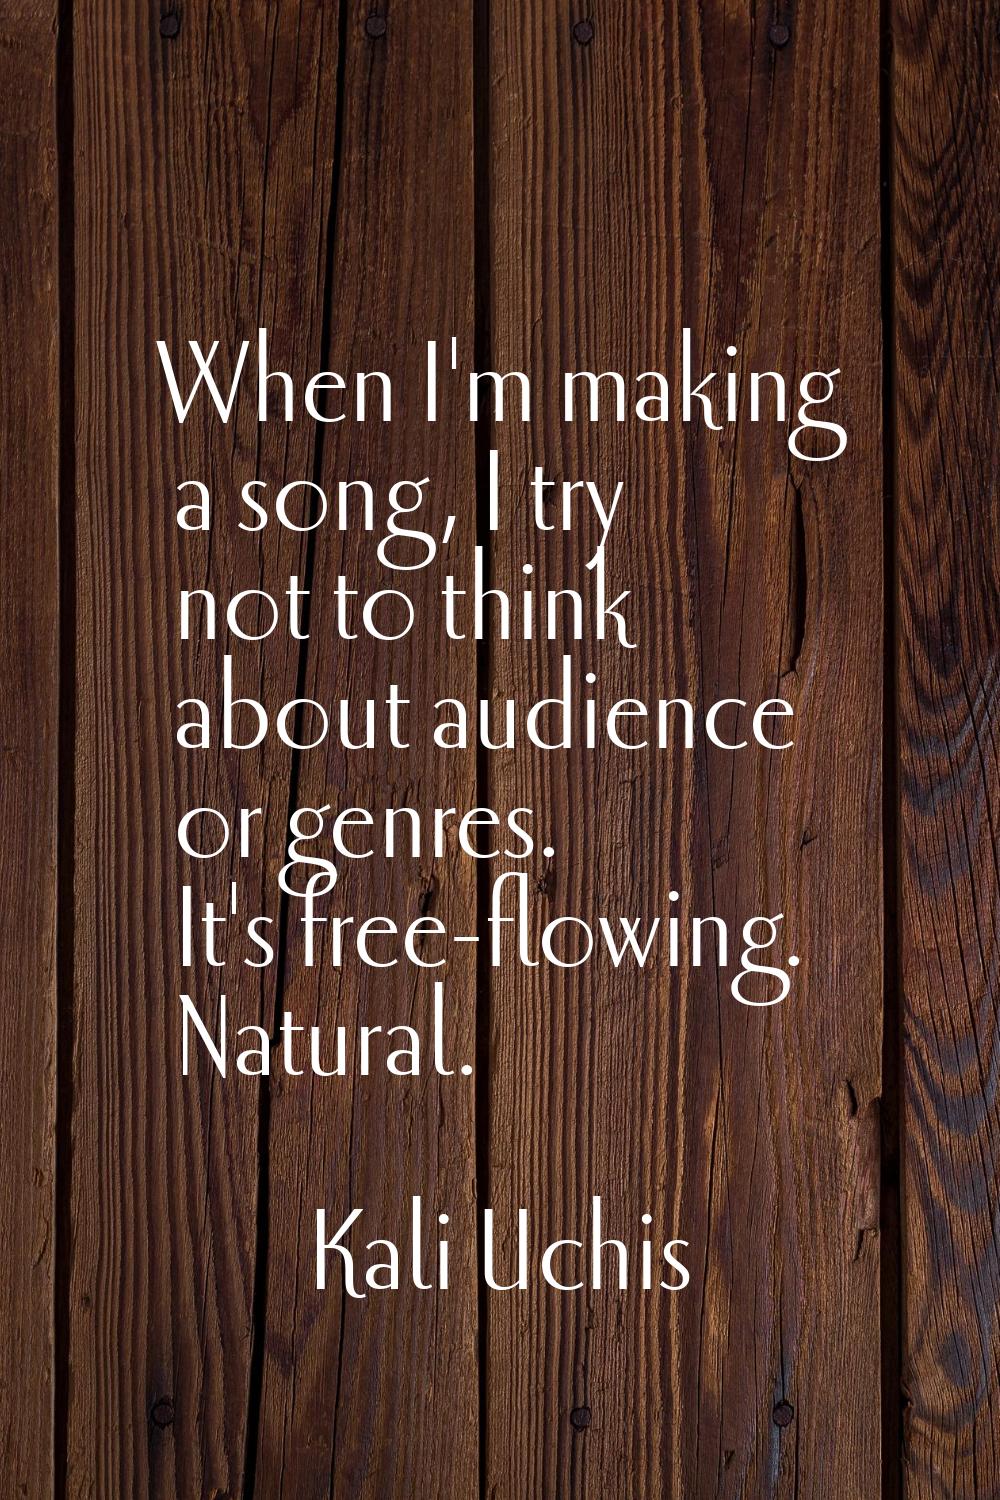 When I'm making a song, I try not to think about audience or genres. It's free-flowing. Natural.